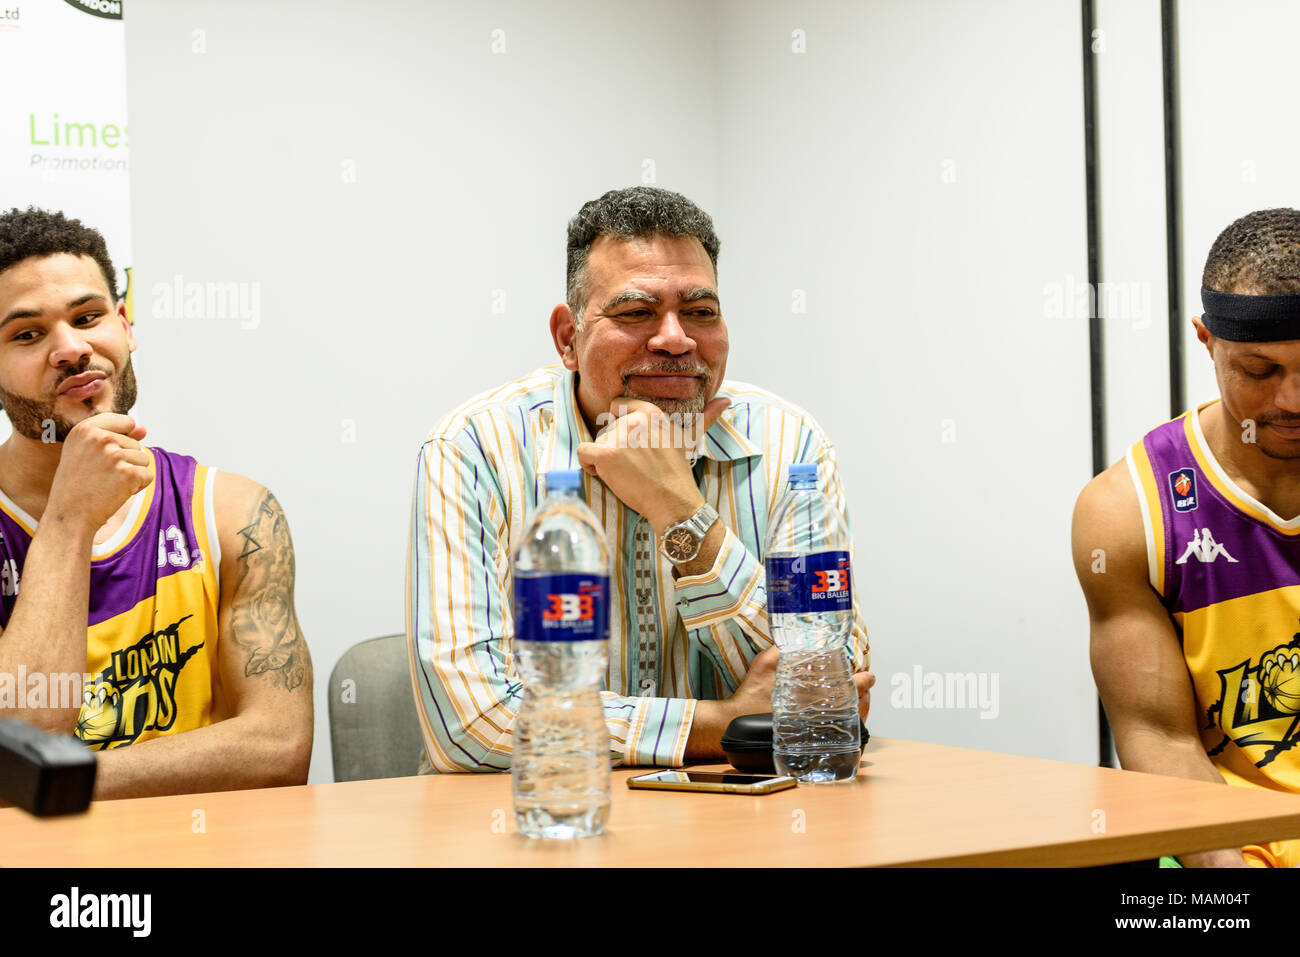 London, UK, 02/04/2018. Big Baller's London Clash at The Copper Box Arena  A very exciting game basketball ball game where Lithuania's Vytautas BC beat London Lions 127 vs 110. London Lion’s coach Vince Macaulay in the press conference after the game with Jordon Spencer (33) (c) pmgimaging /Alamy Live News Stock Photo